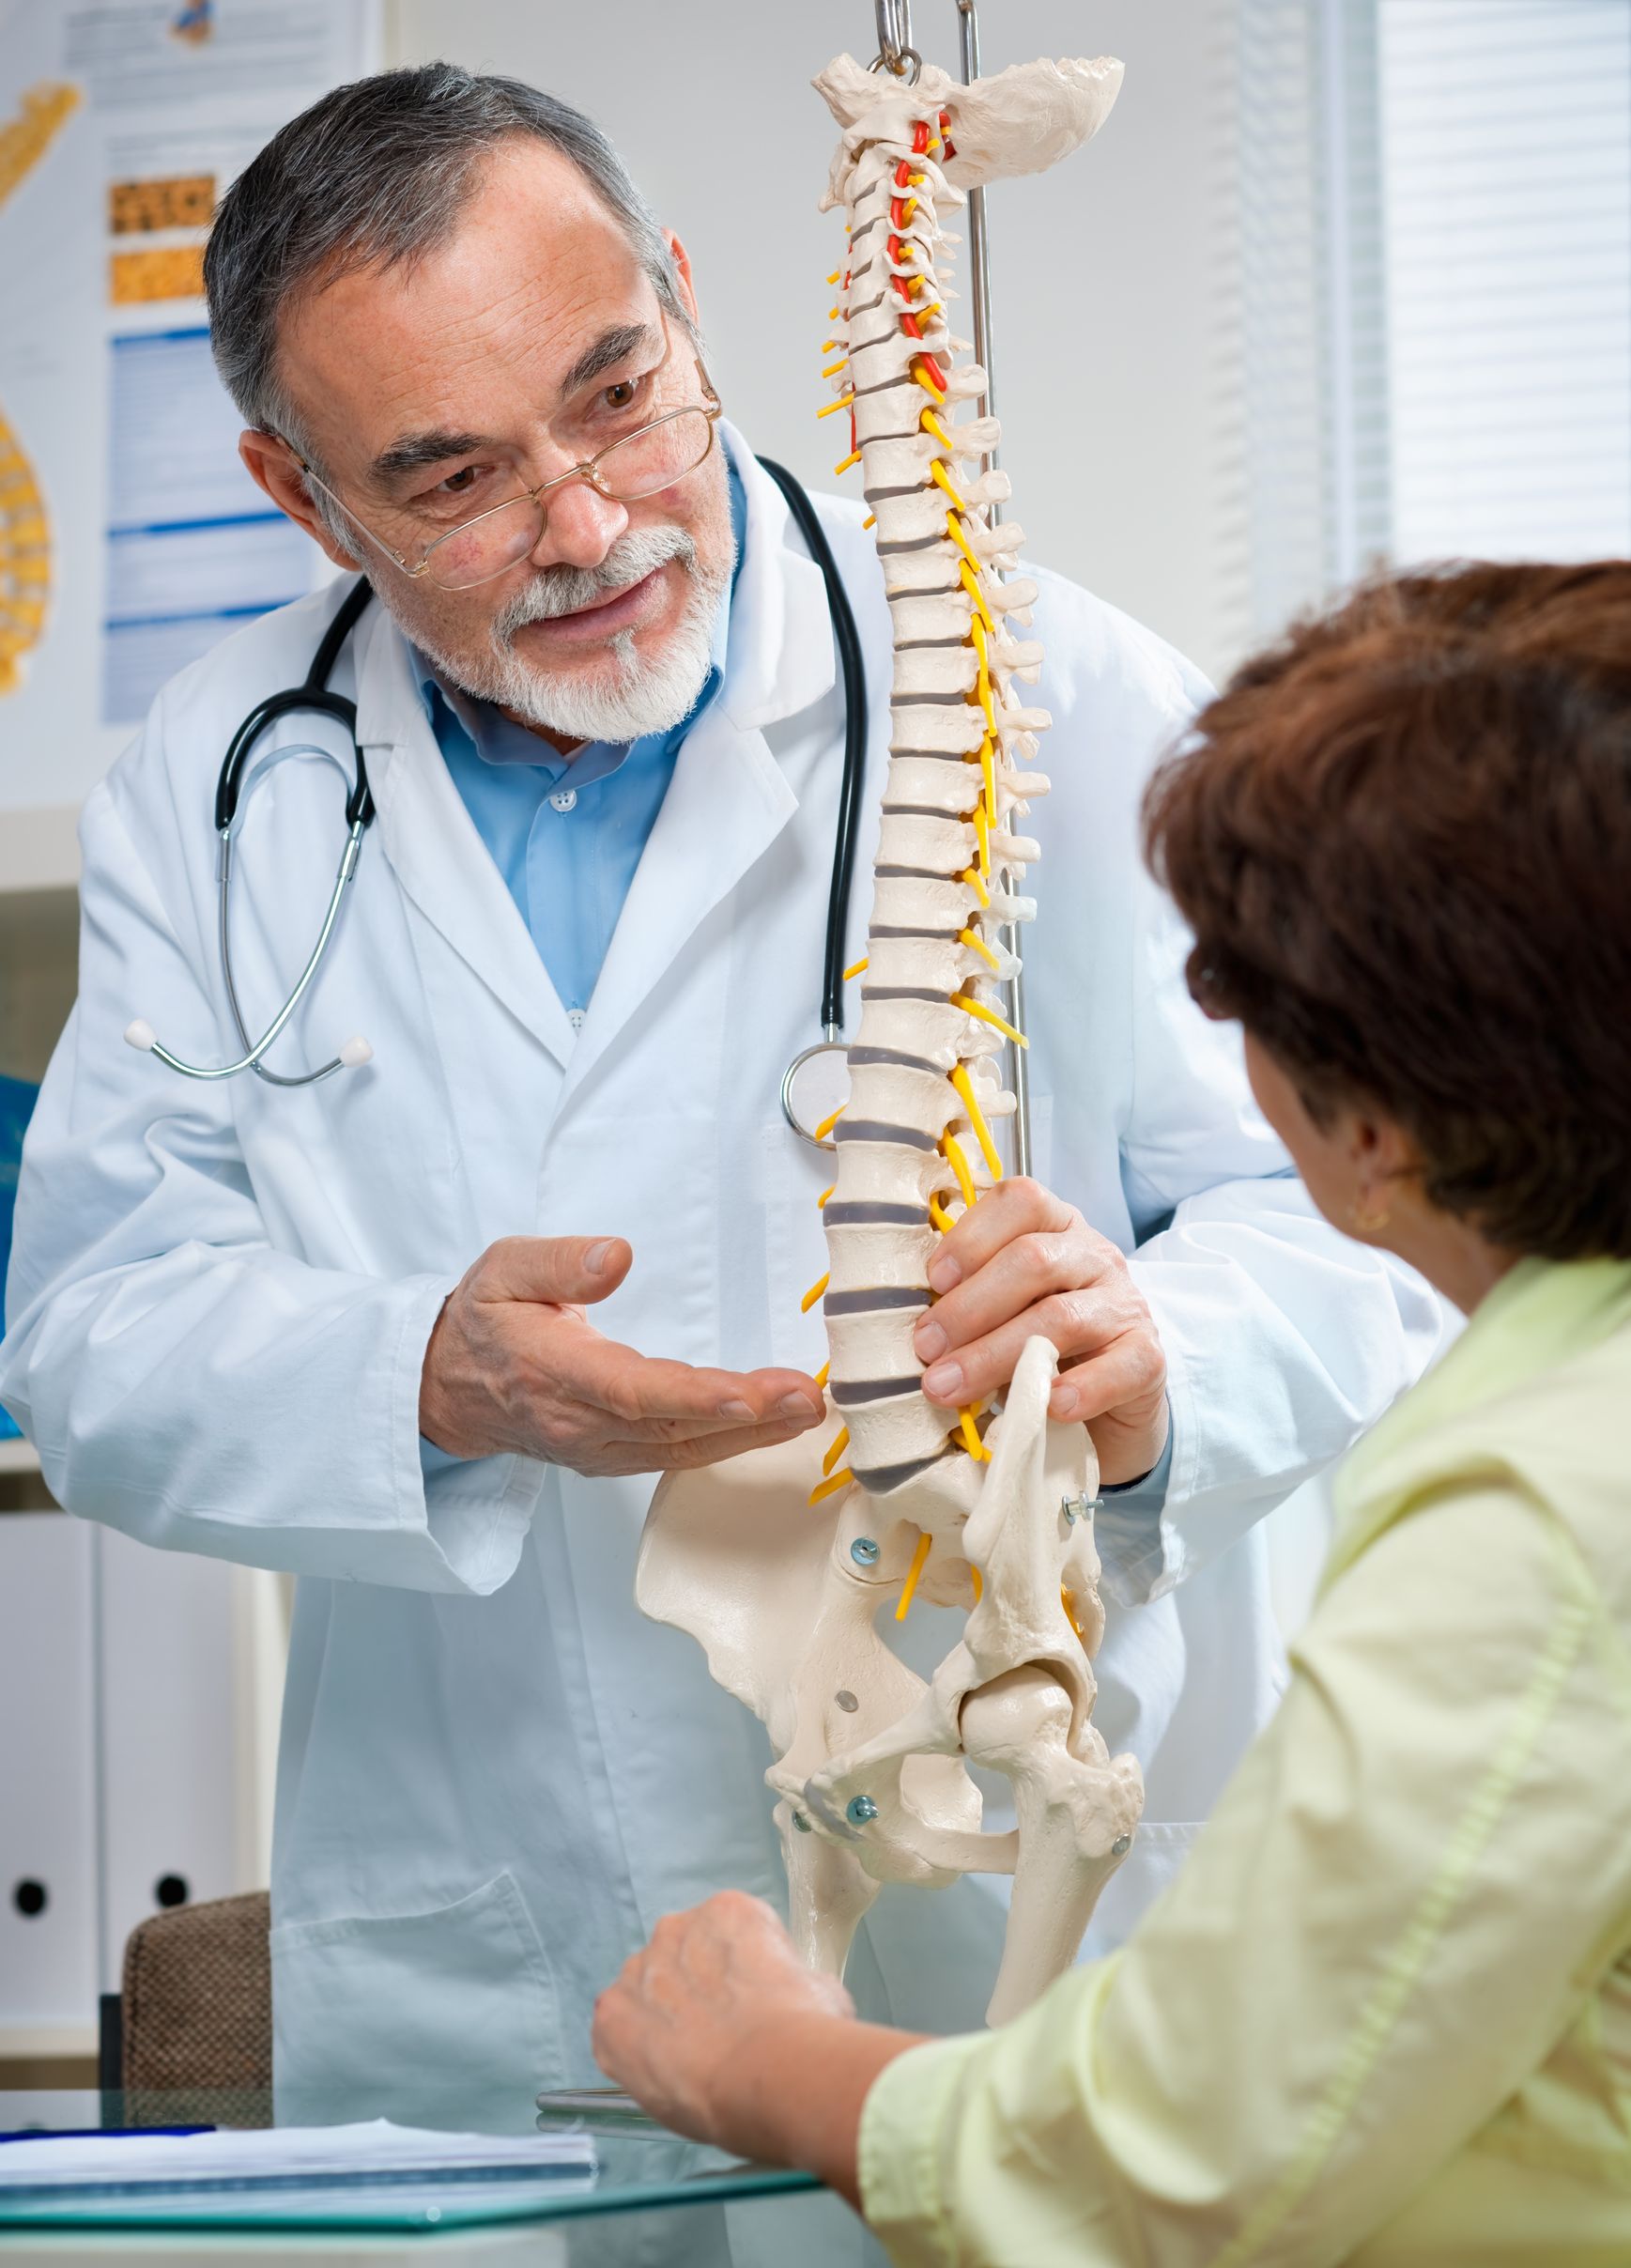 What exactly does a chiropractor do?